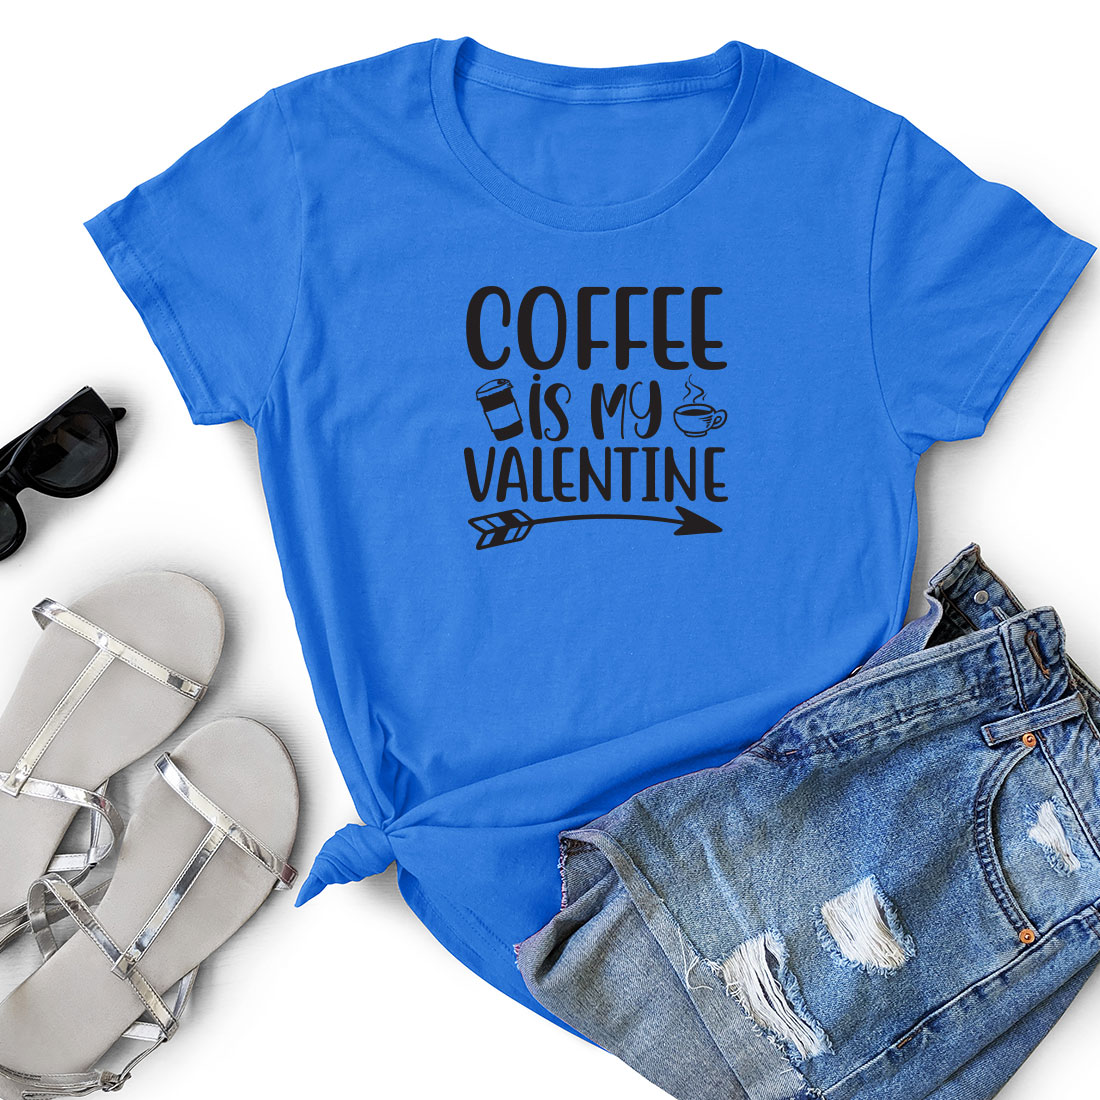 T - shirt that says coffee is my valentine.